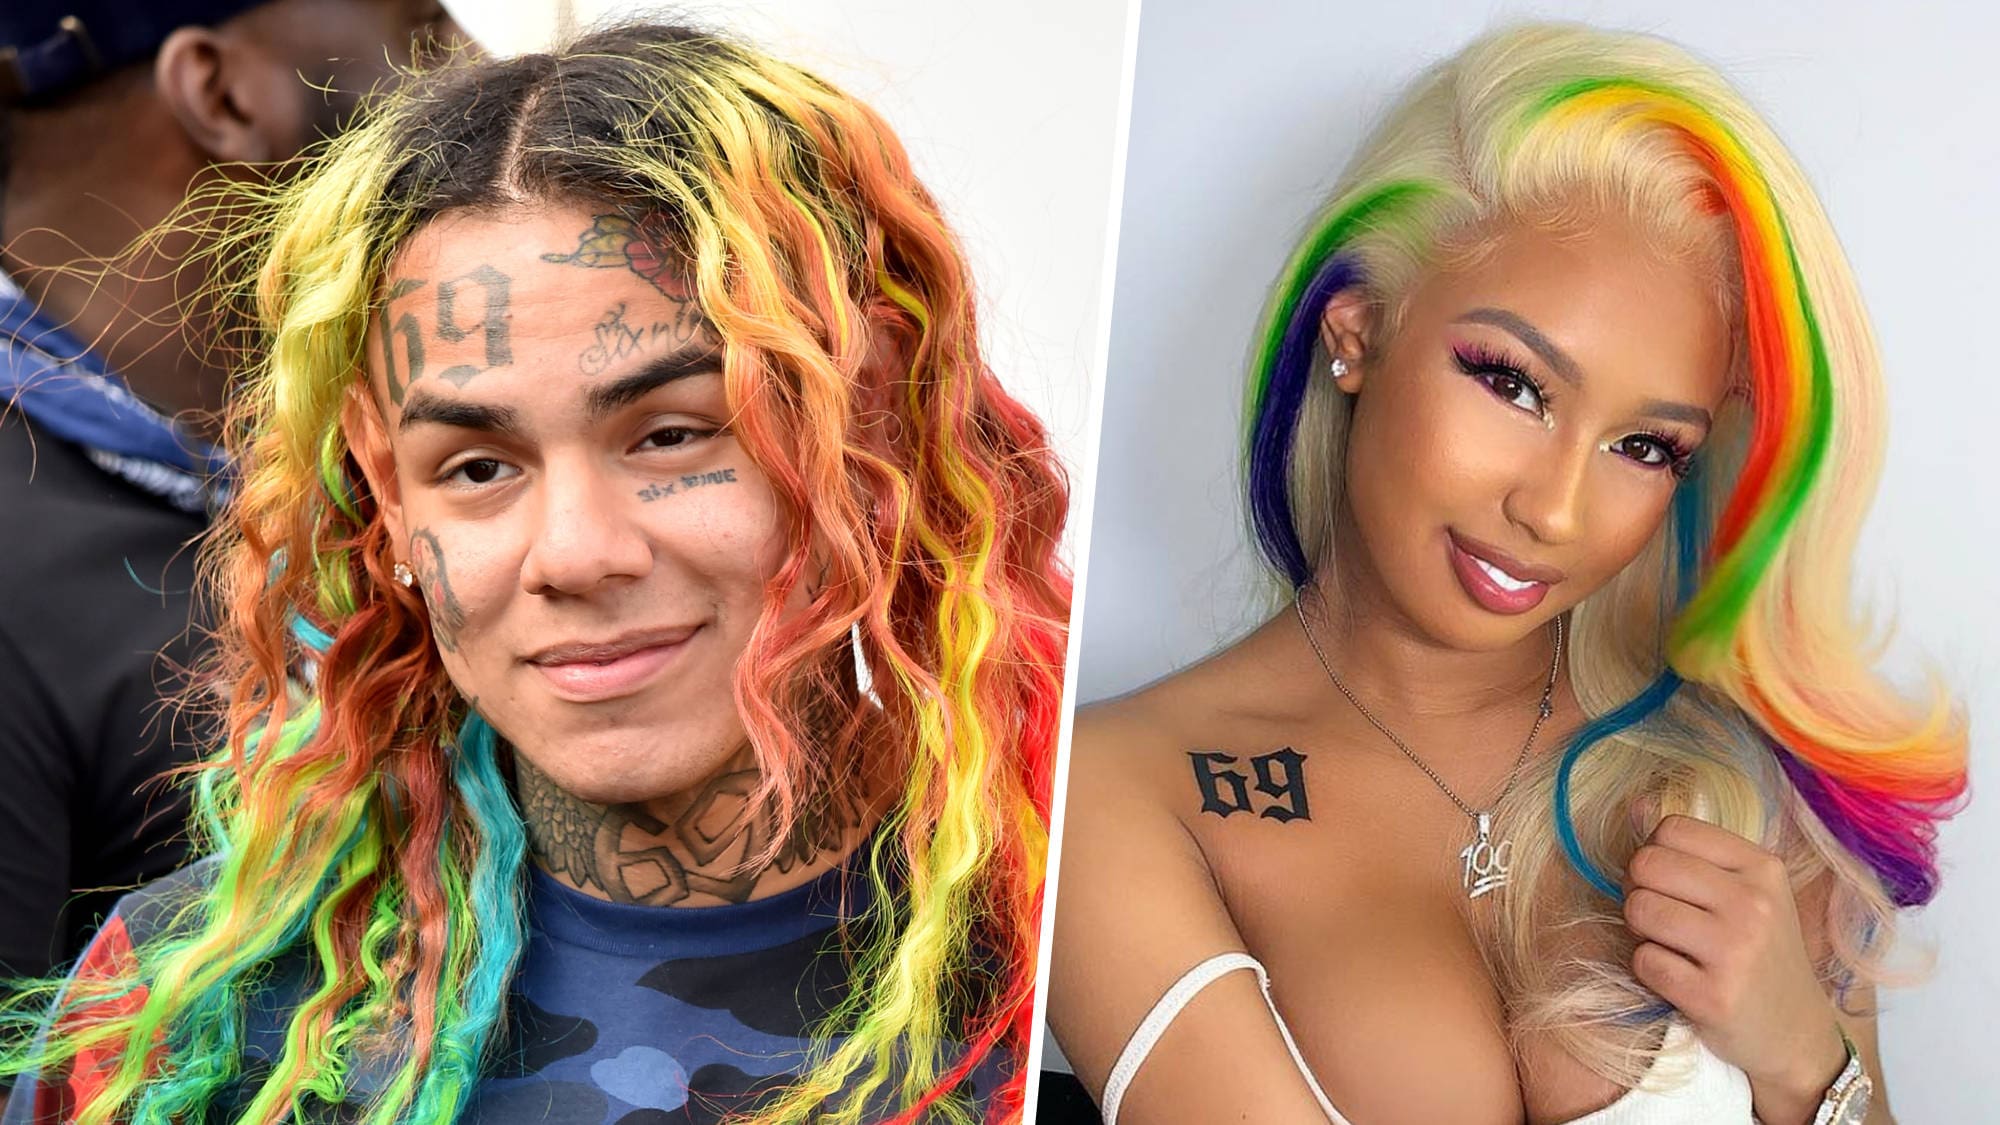 Tekashi 69 Online Bail Petition Gathers 21K Signatures Within 13 Hours - His GF Jade And Fans Are Showing Their Support For The Rapper